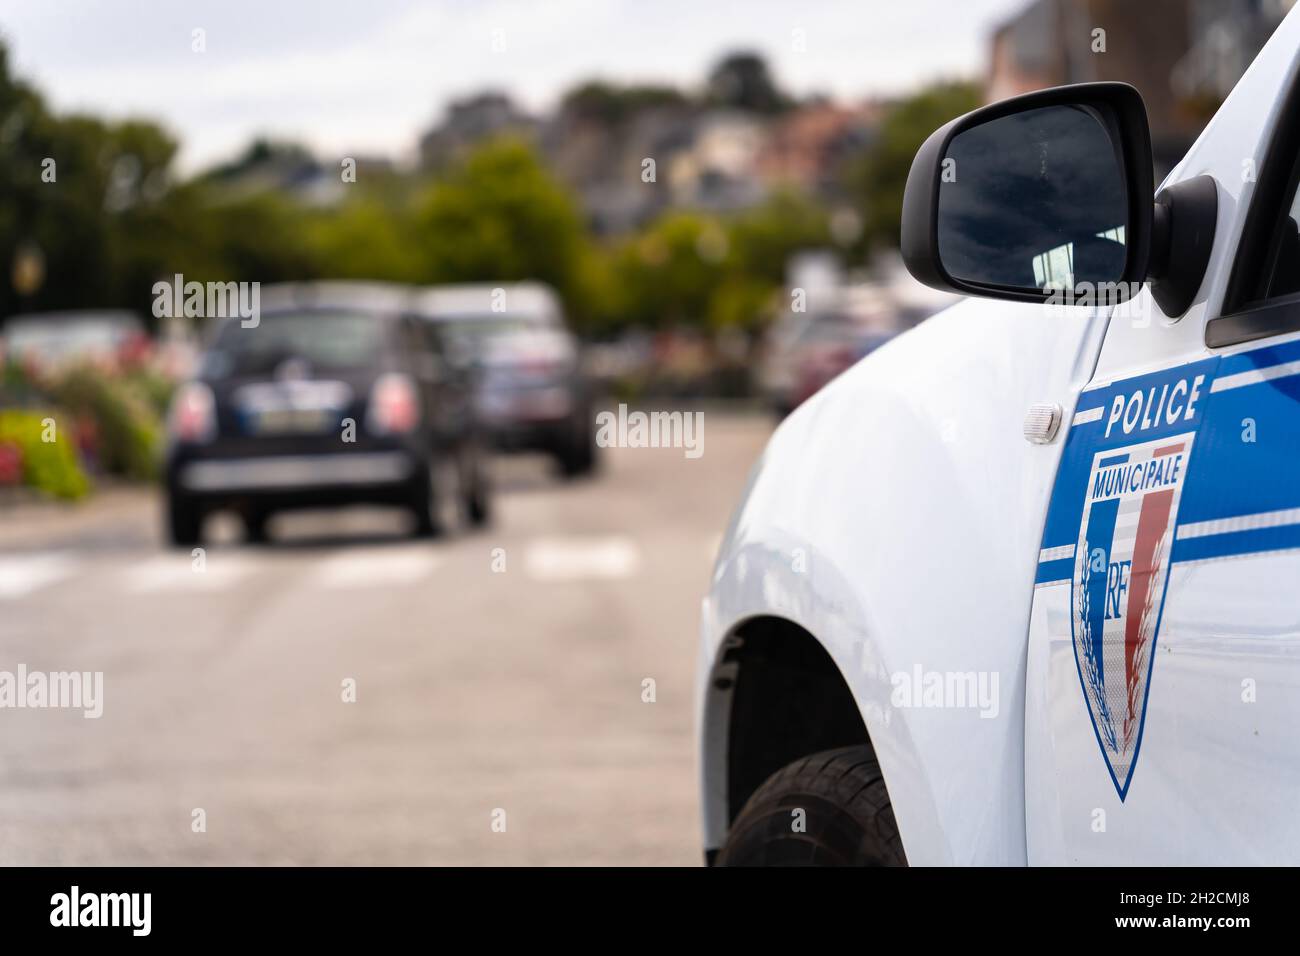 Honfleur, France - August 4, 2021: A white car of French Municipal police controlling traffic. Stock Photo